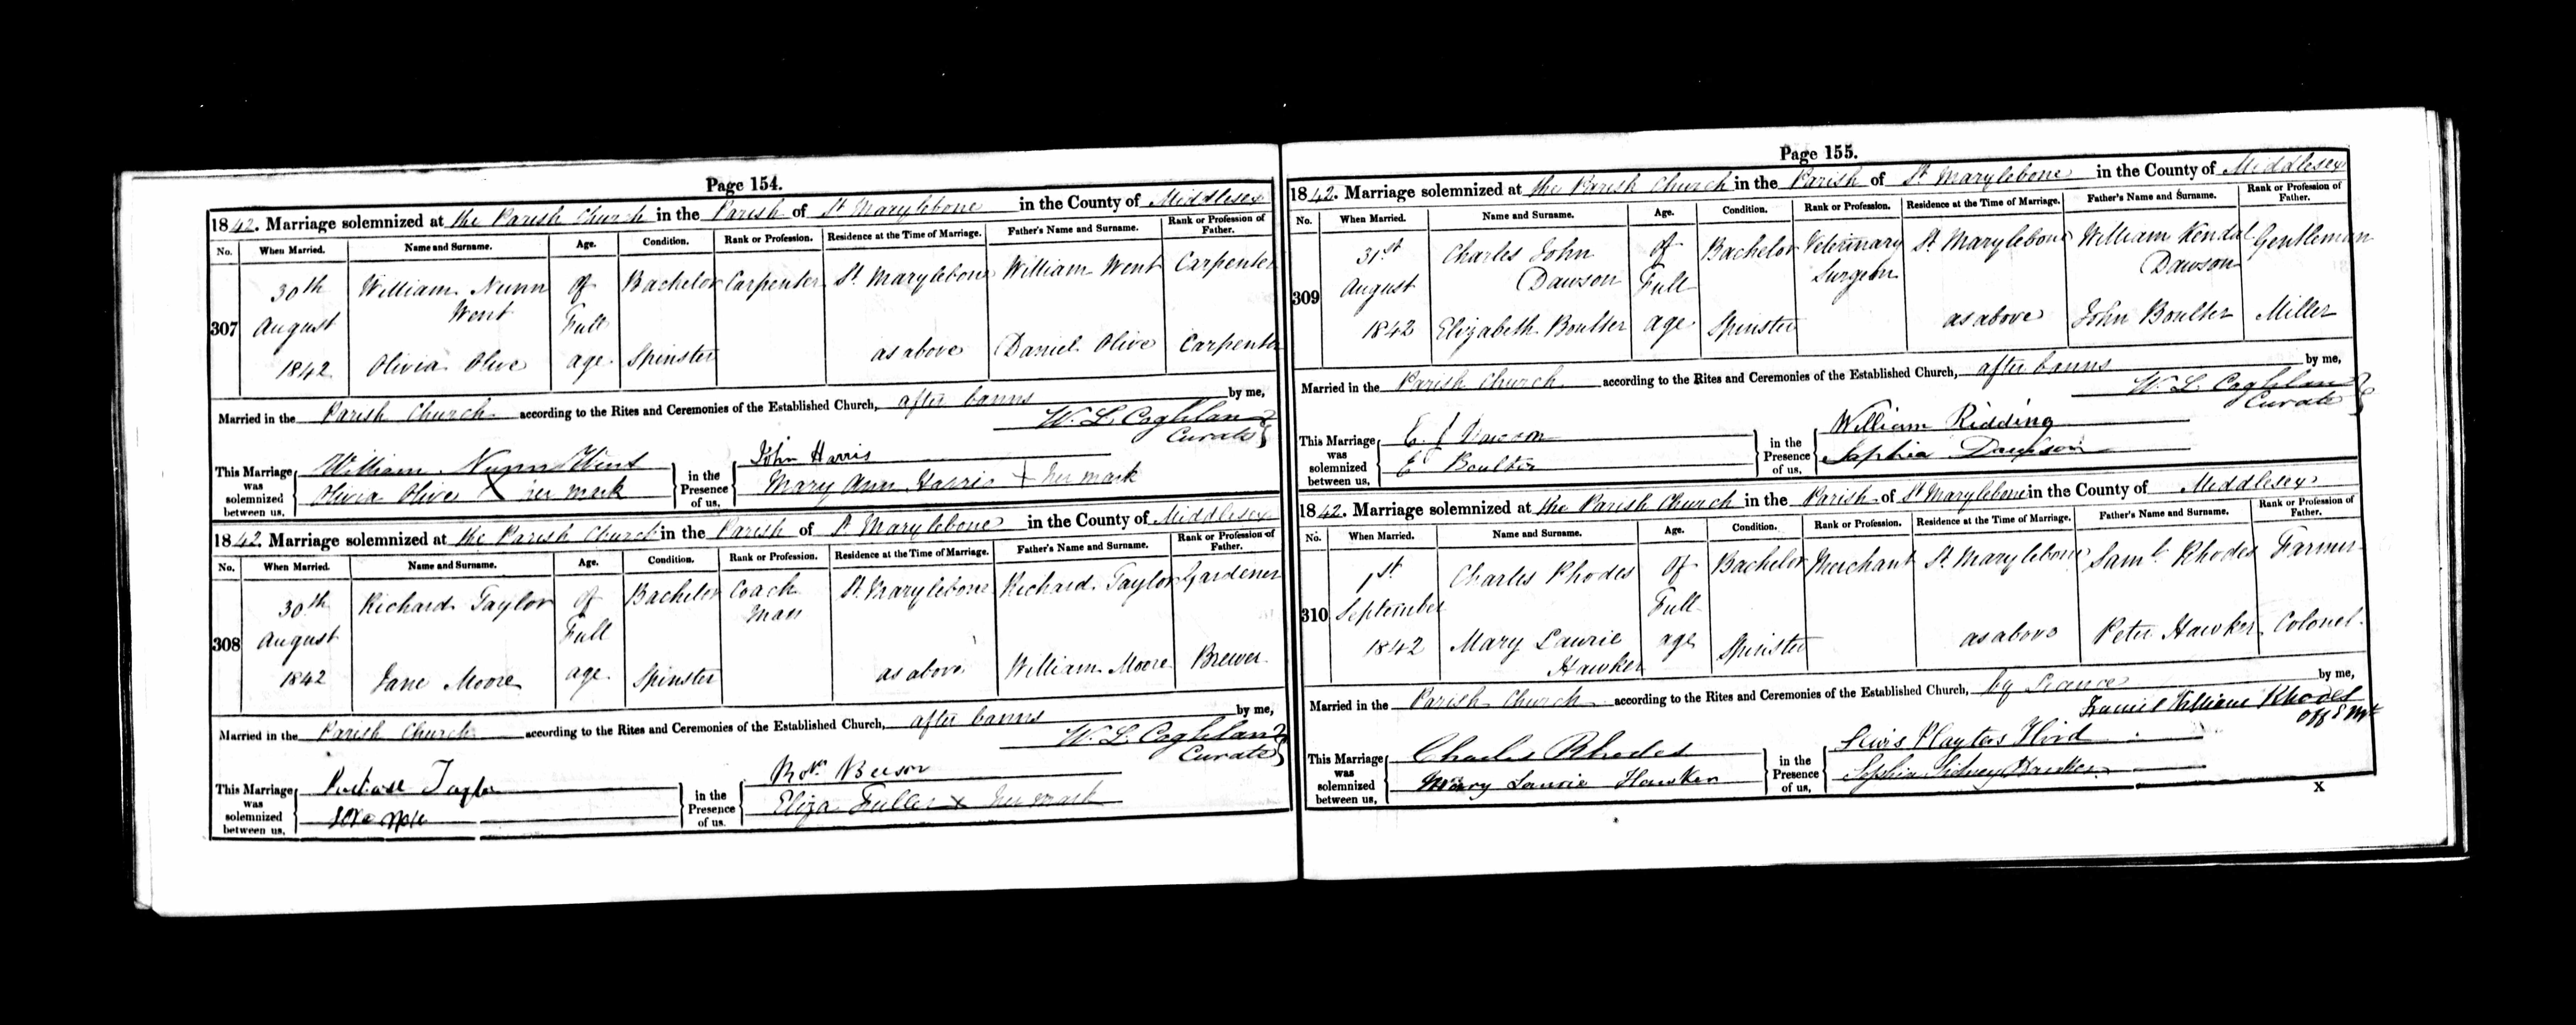 1842 marriage of  Boulter to Charles John Dawson